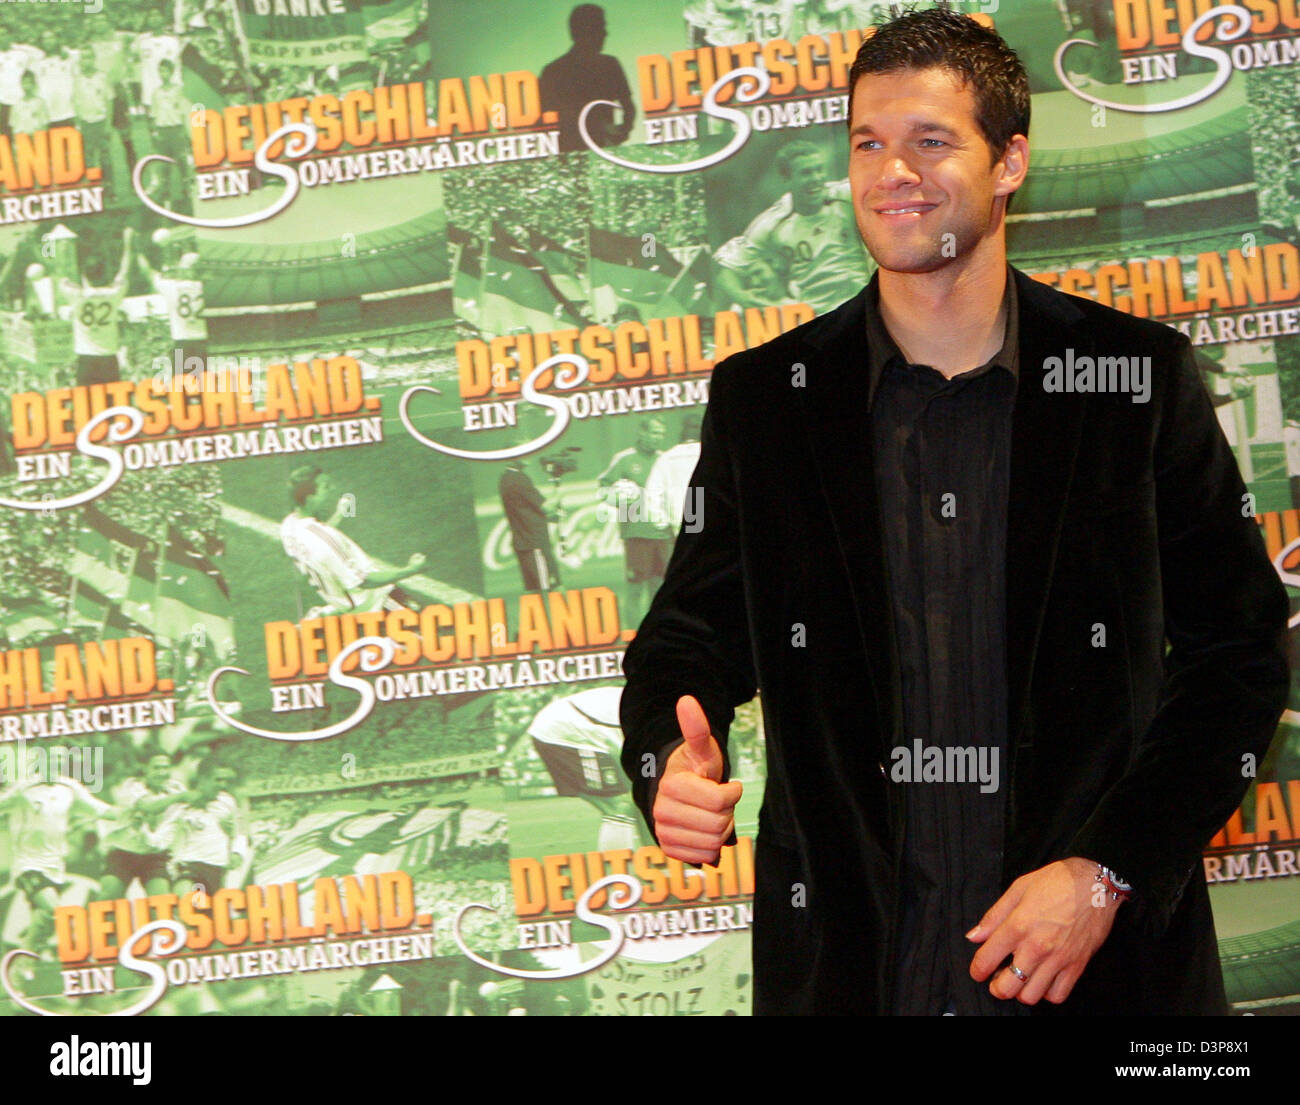 Captain of the German national soccer team Michael Ballack signals thumbs up prior to the premiere of the film 'Deutschland - Ein Sommermaerchen' ('Germany - A summer dream') at the Berlinale film palace in Berlin, Germany,  Tuesday, 03 October 2006. The film recalls the story of the German soccer national team during the 2006 FIFA World Cup. The film will be shown in German cinema Stock Photo